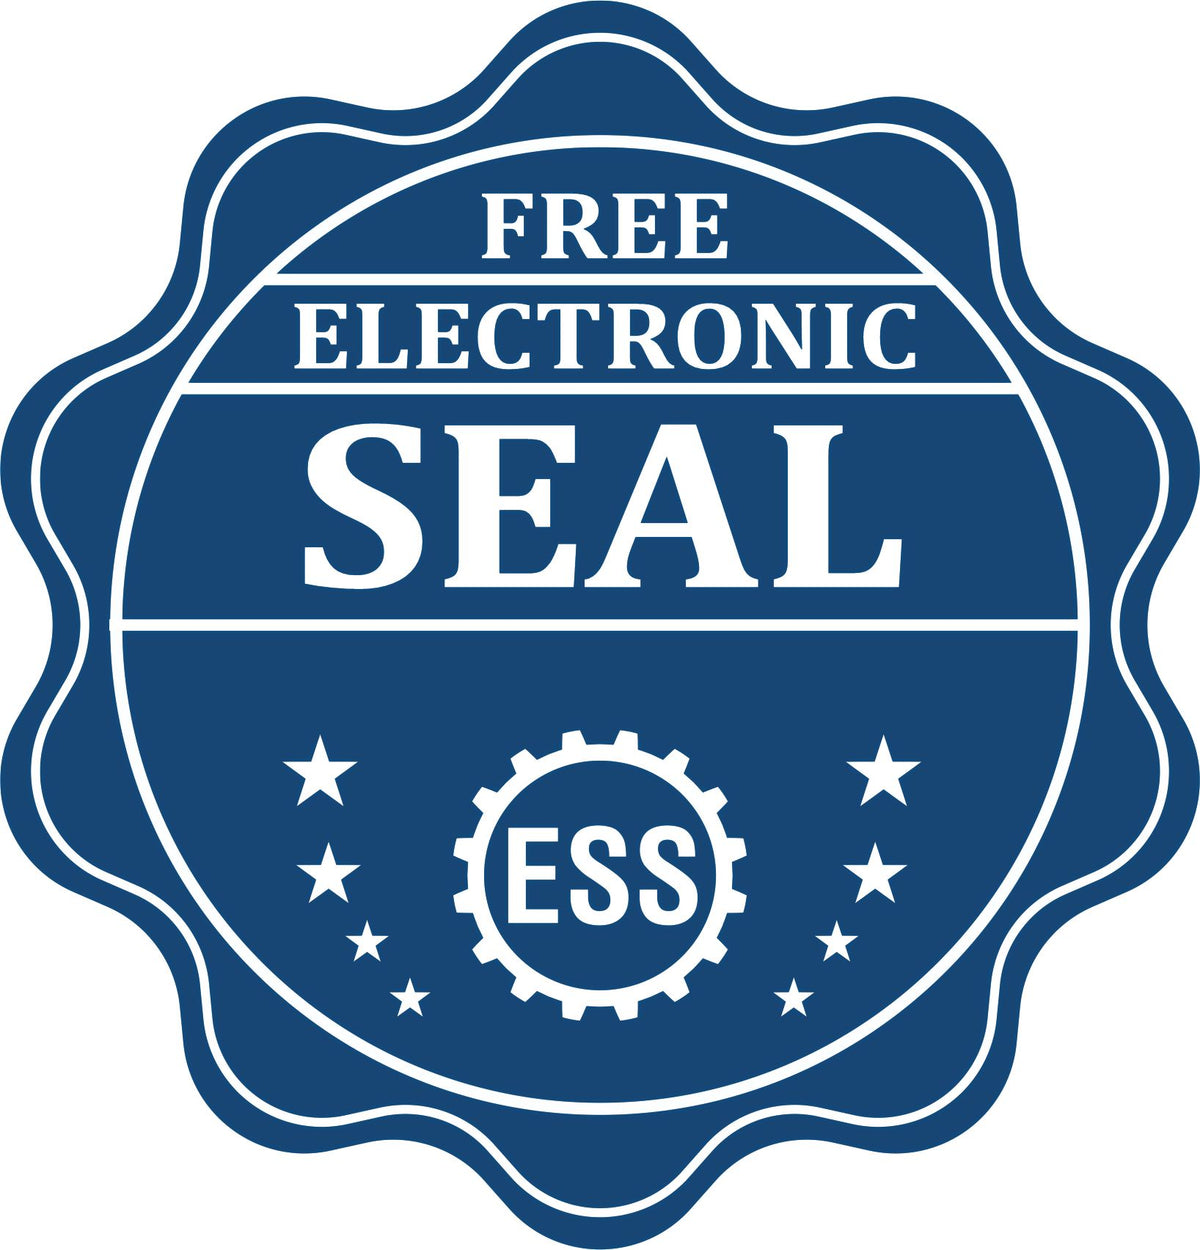 A badge showing a free electronic seal for the Long Reach Arizona PE Seal with stars and the ESS gear on the emblem.